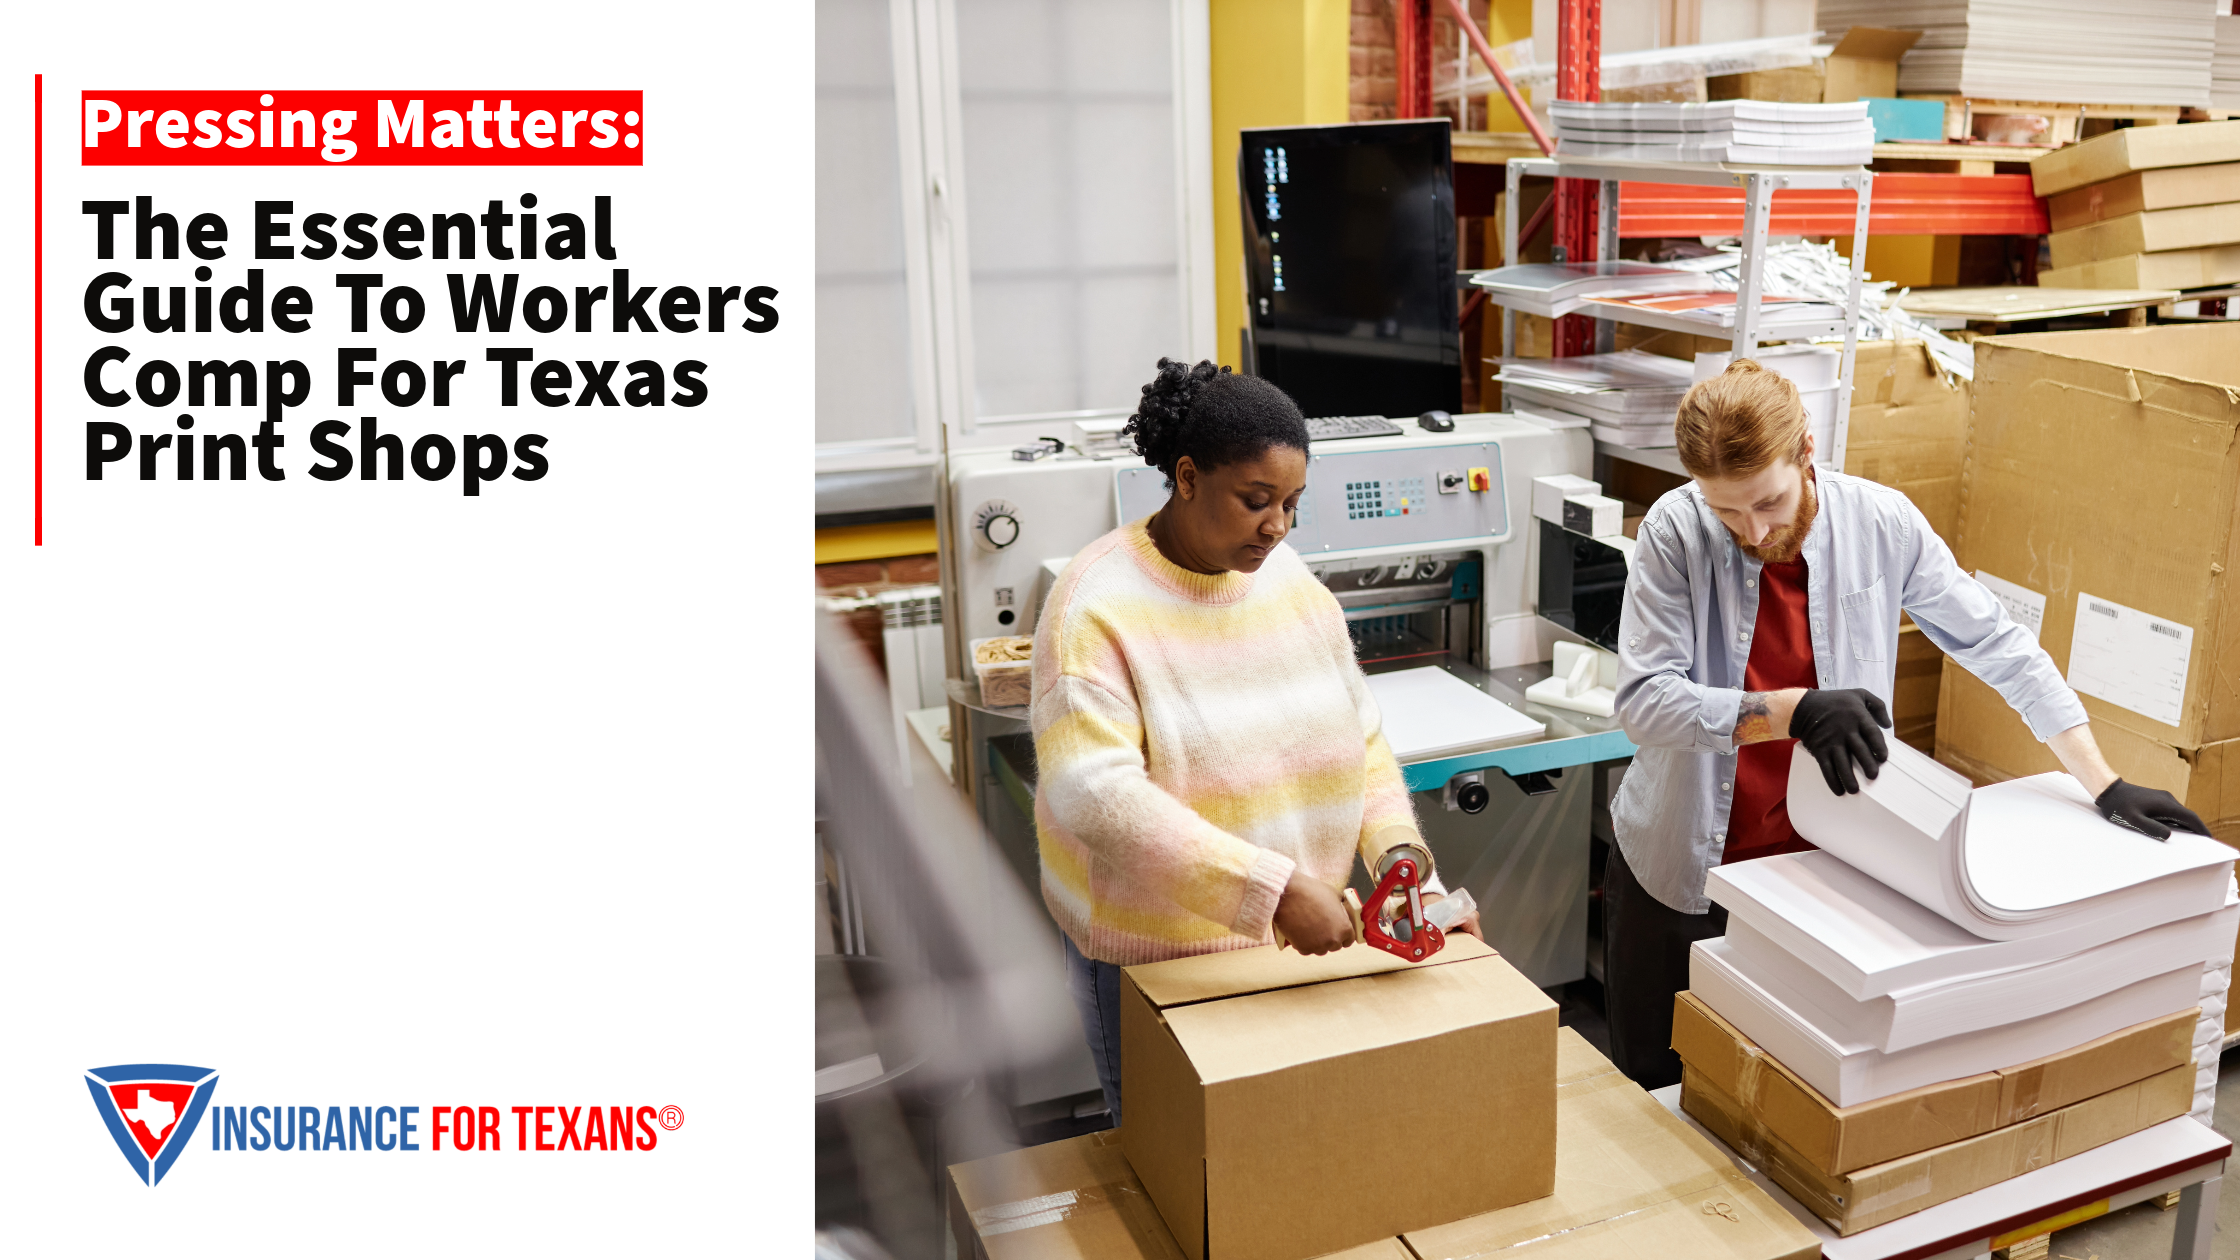 Pressing Matters: The Essential Guide to Workers Comp for Texas Print Shops